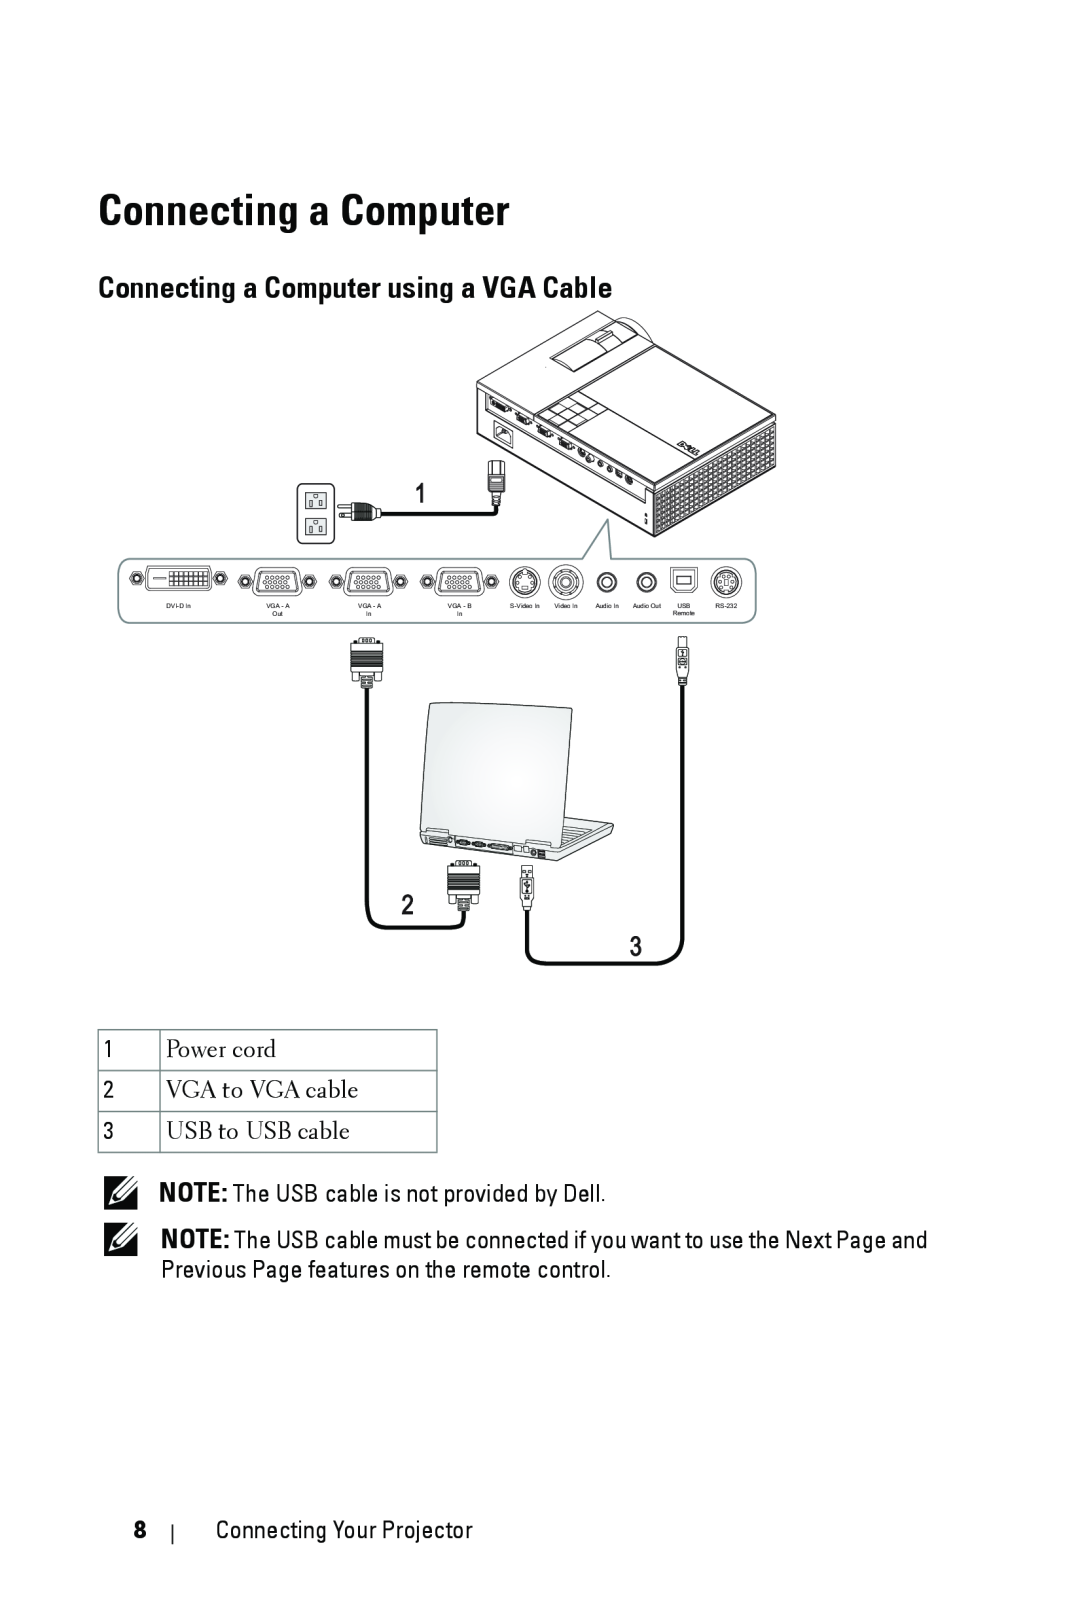 Dell 1209S manual Connecting a Computer using a VGA Cable, NOTE: The USB cable is not provided by Dell 